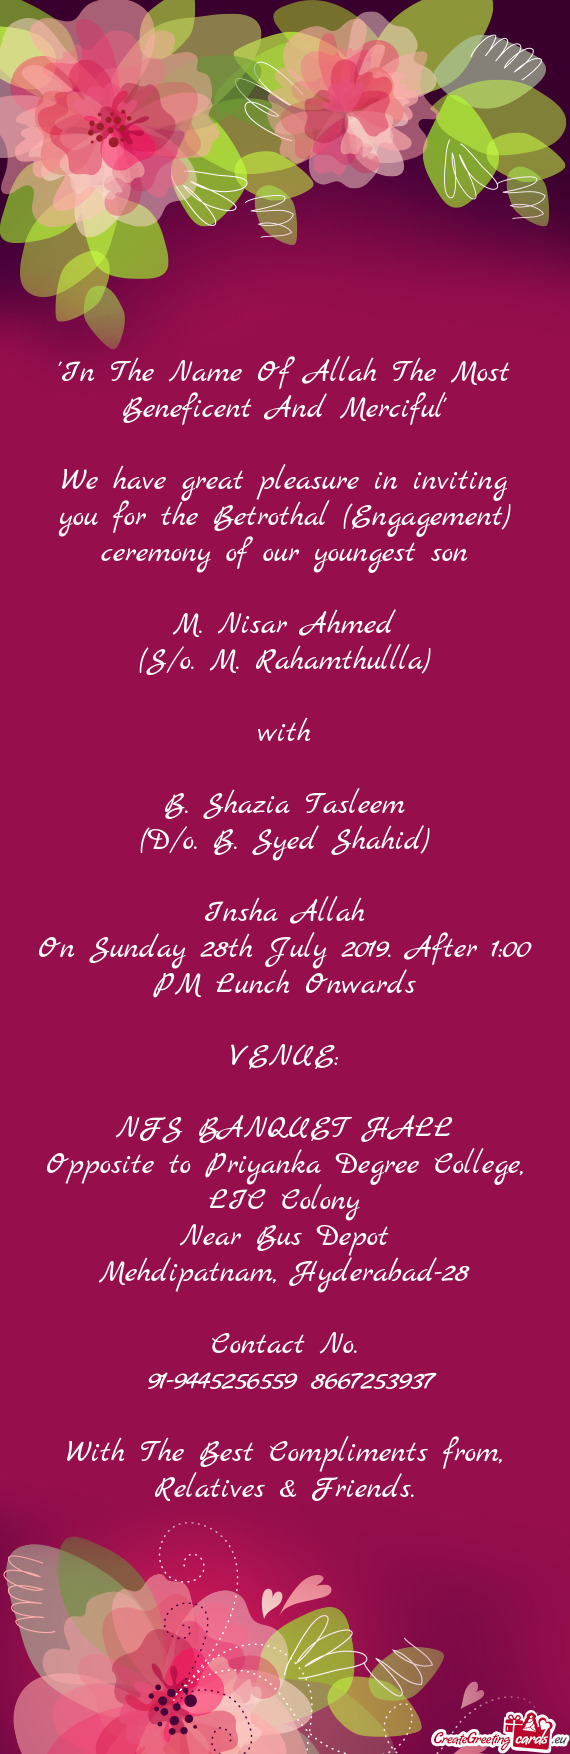 We have great pleasure in inviting you for the Betrothal (Engagement) ceremony of our youngest son